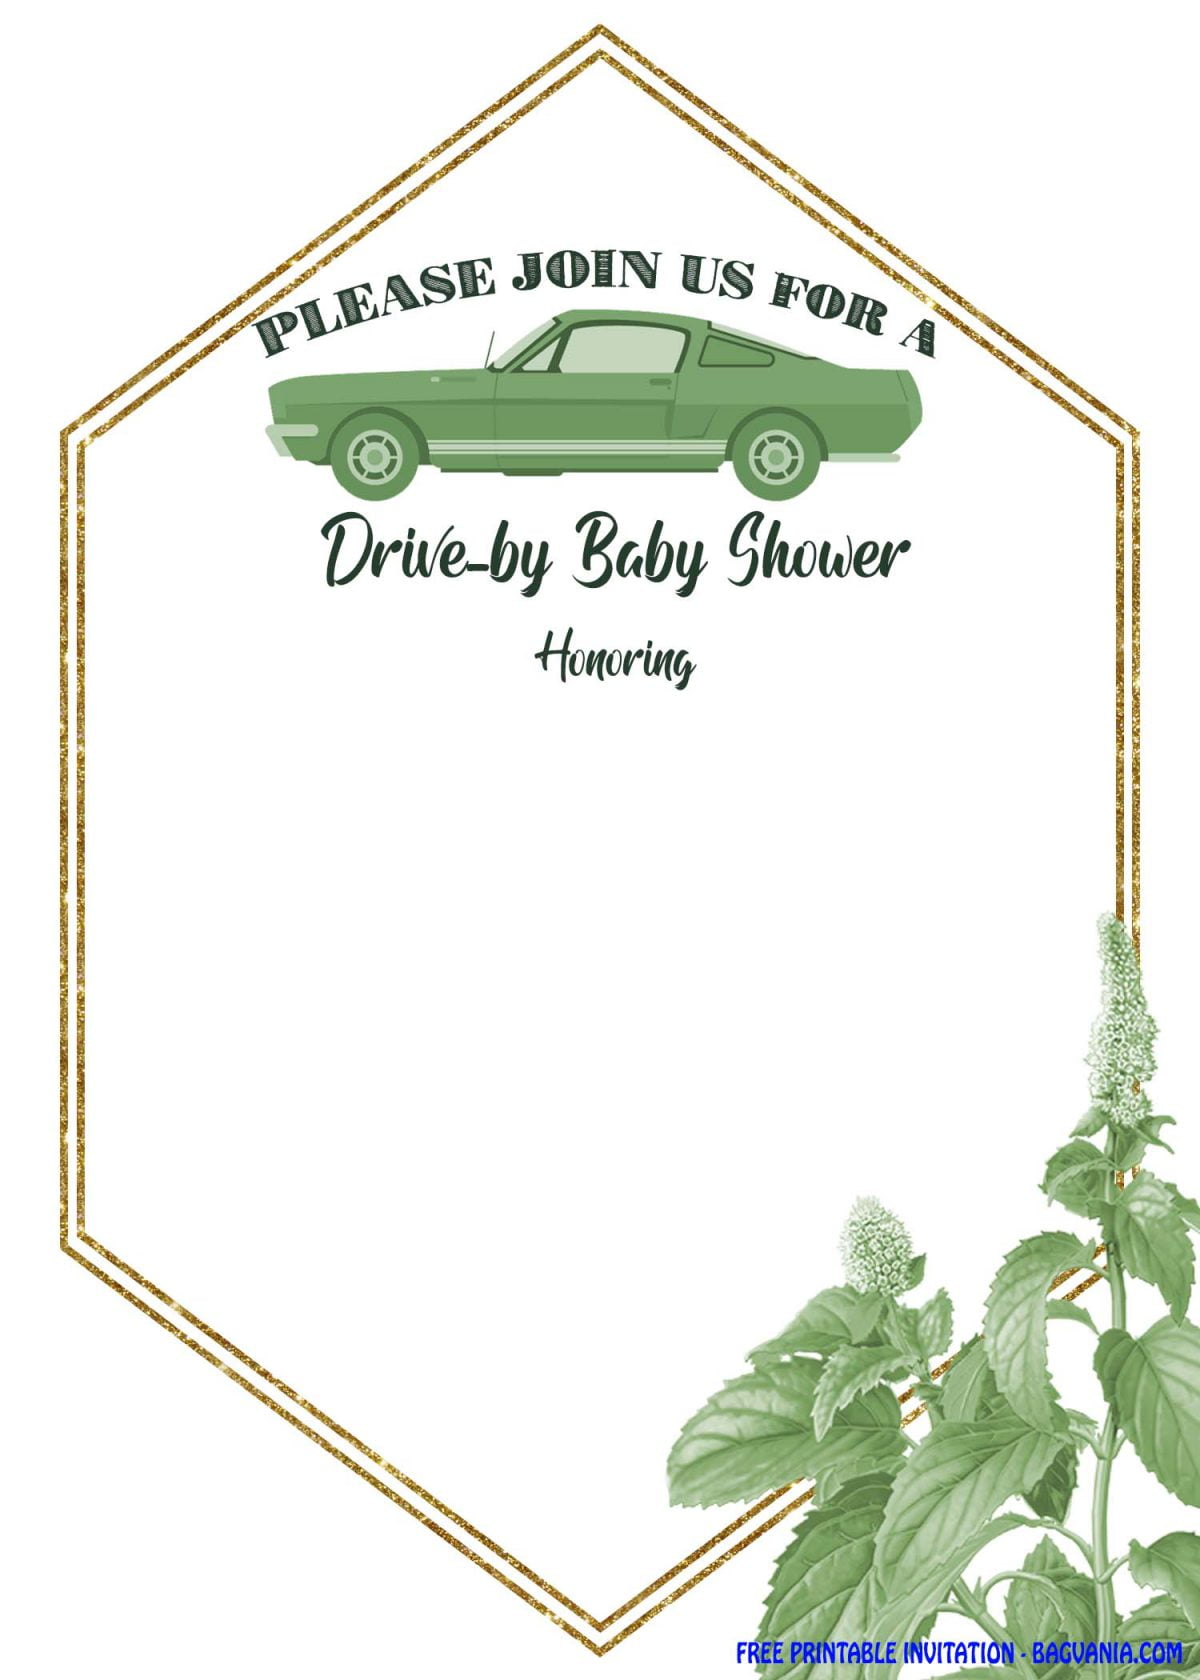 Free Printable Greenery Hexagonal Drive By Invitation Templates With Classic Car Image